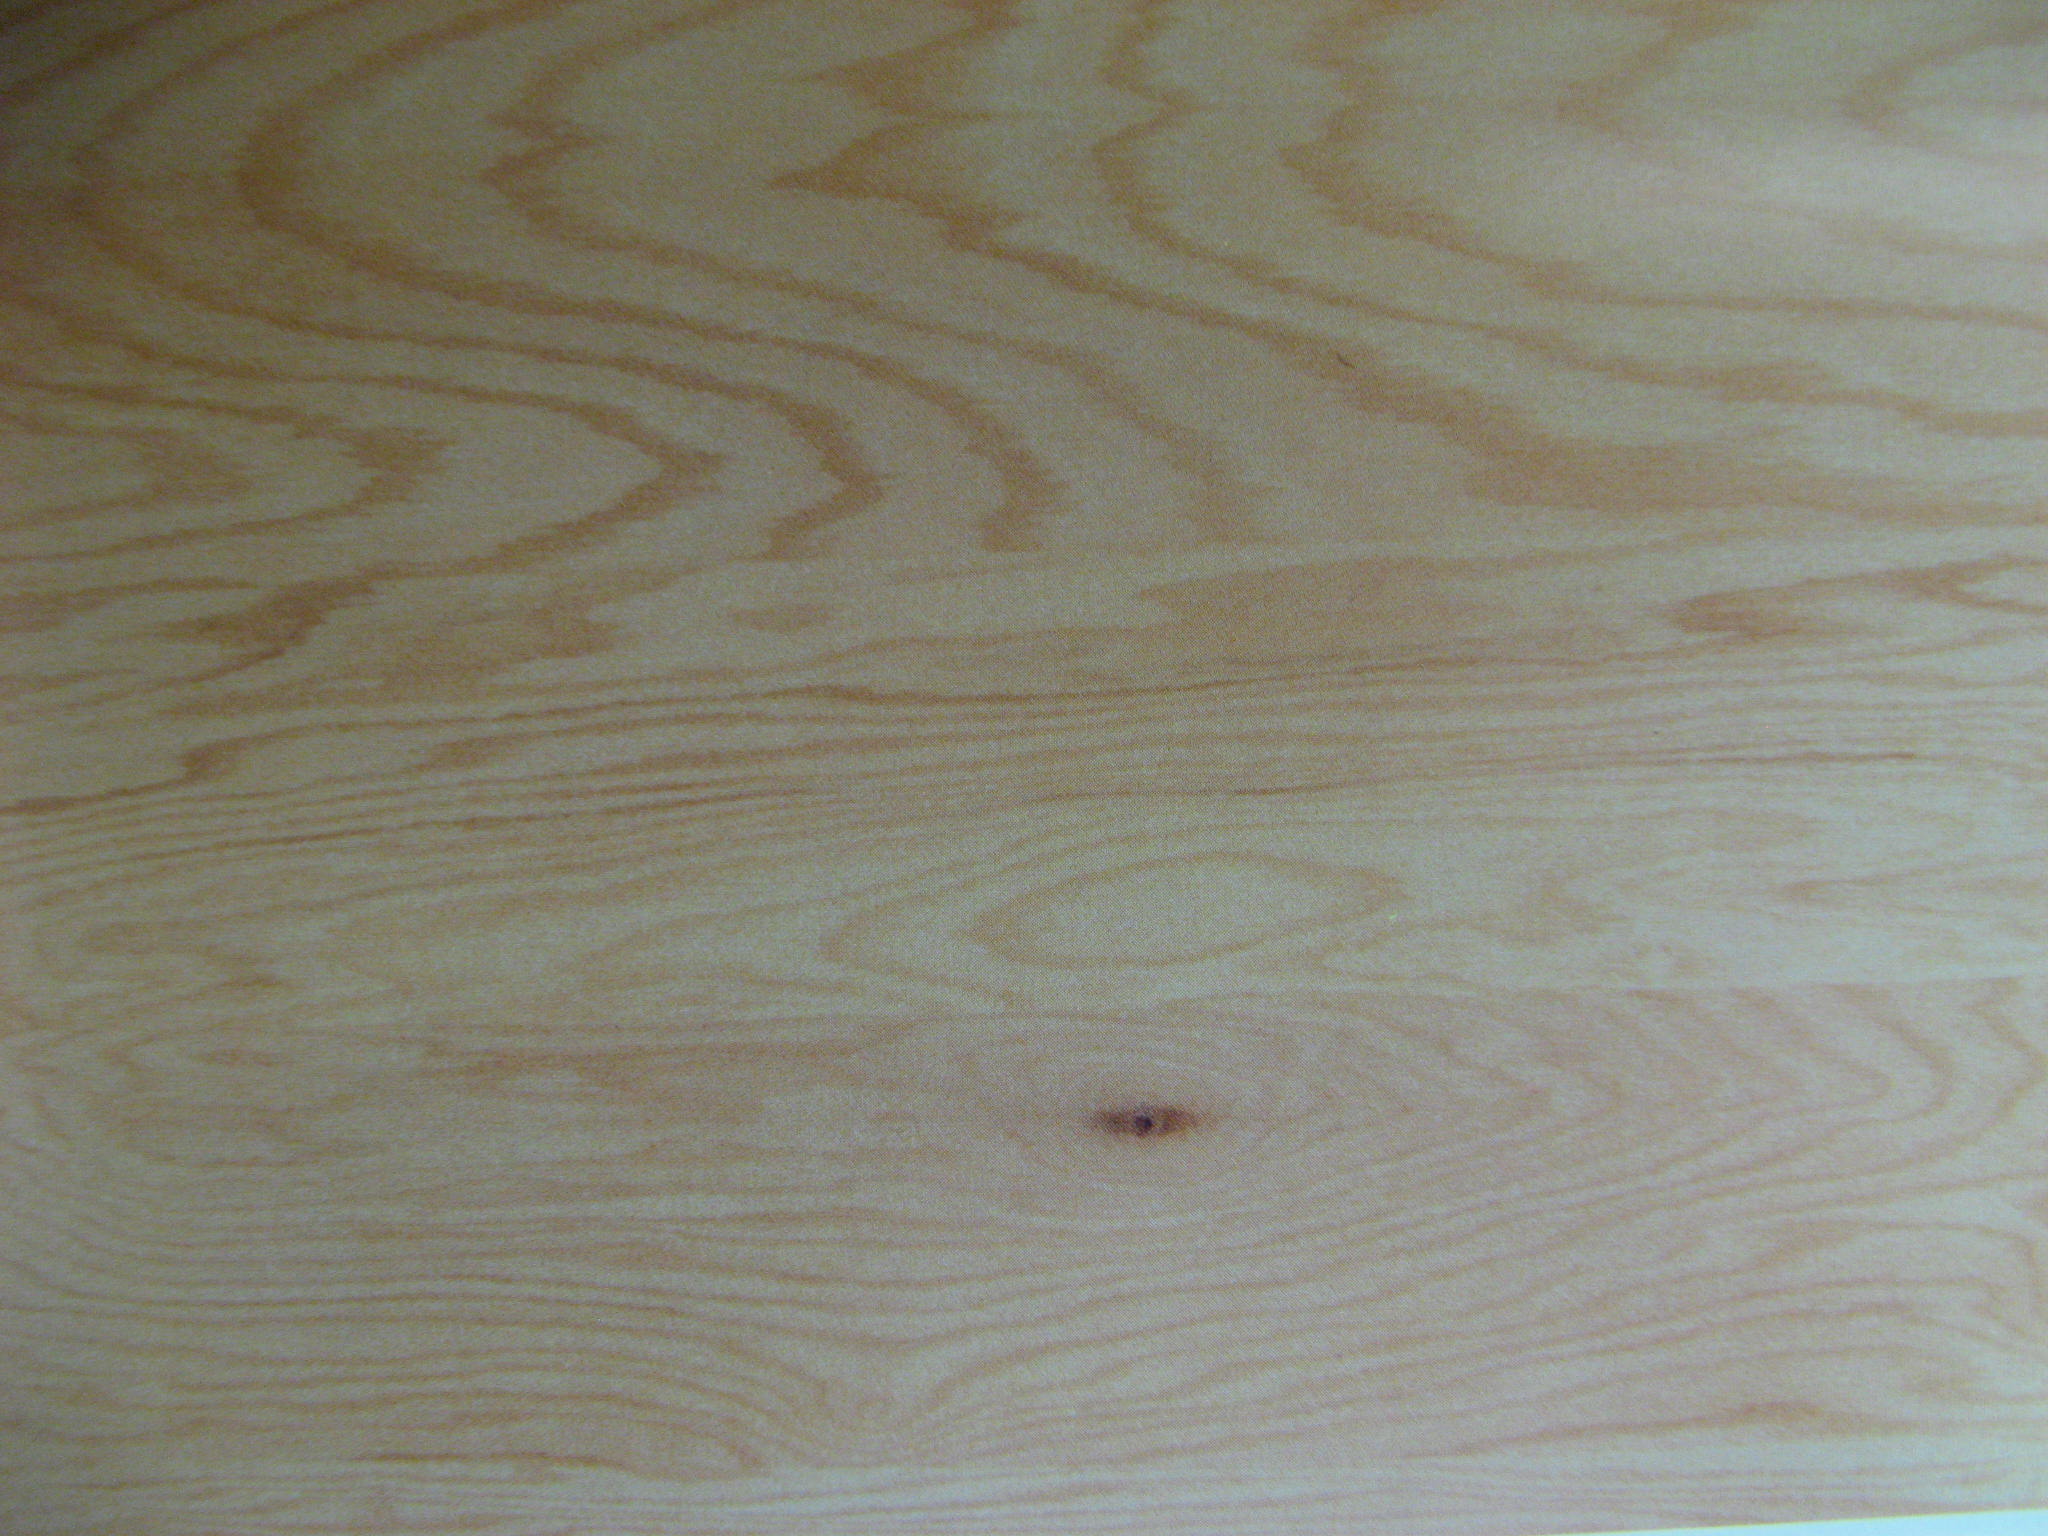 BALTIC BIRCH PLYWOOD 1/8 (3mm) BY APPROX 22 X 26 - 10 PIECES